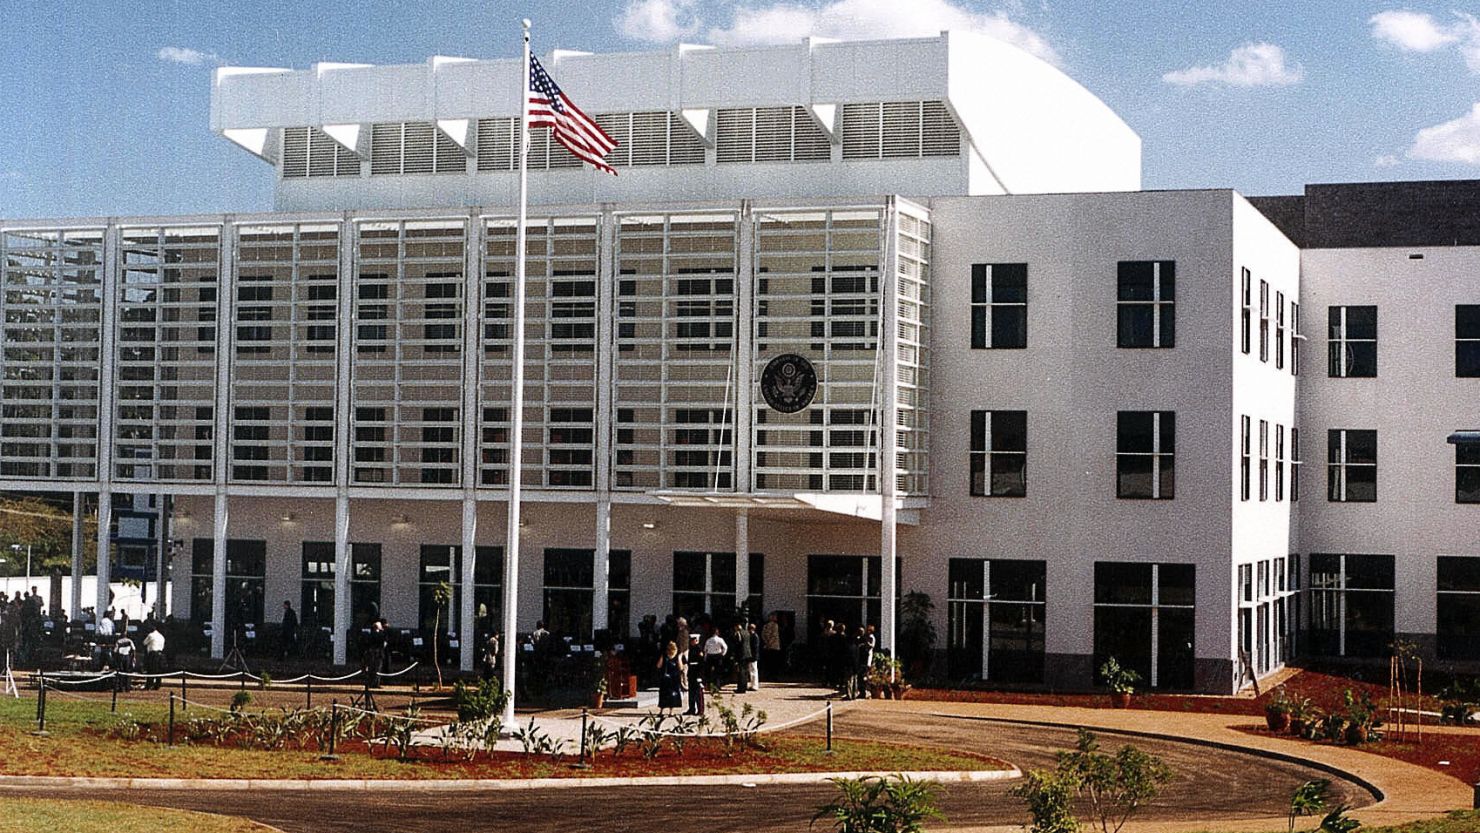 The US Embassy in Nairobi is located in the Gigiri district, which is also home to several other countries' embassies.